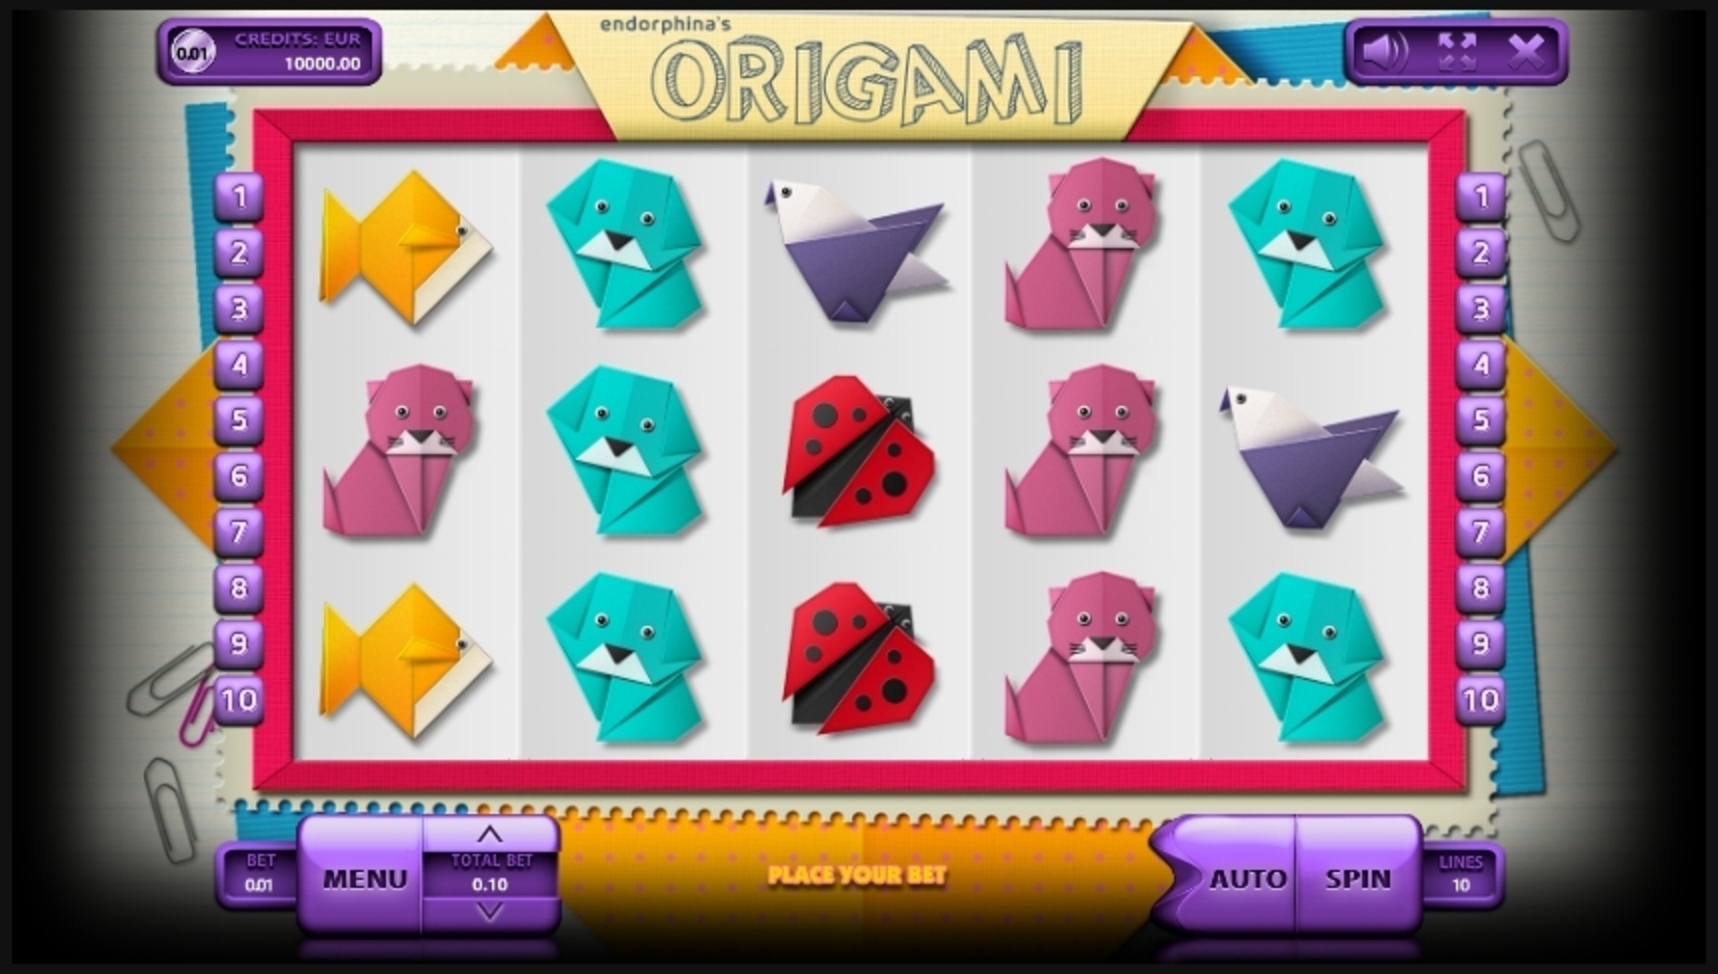 Reels in Origami Slot Game by Endorphina